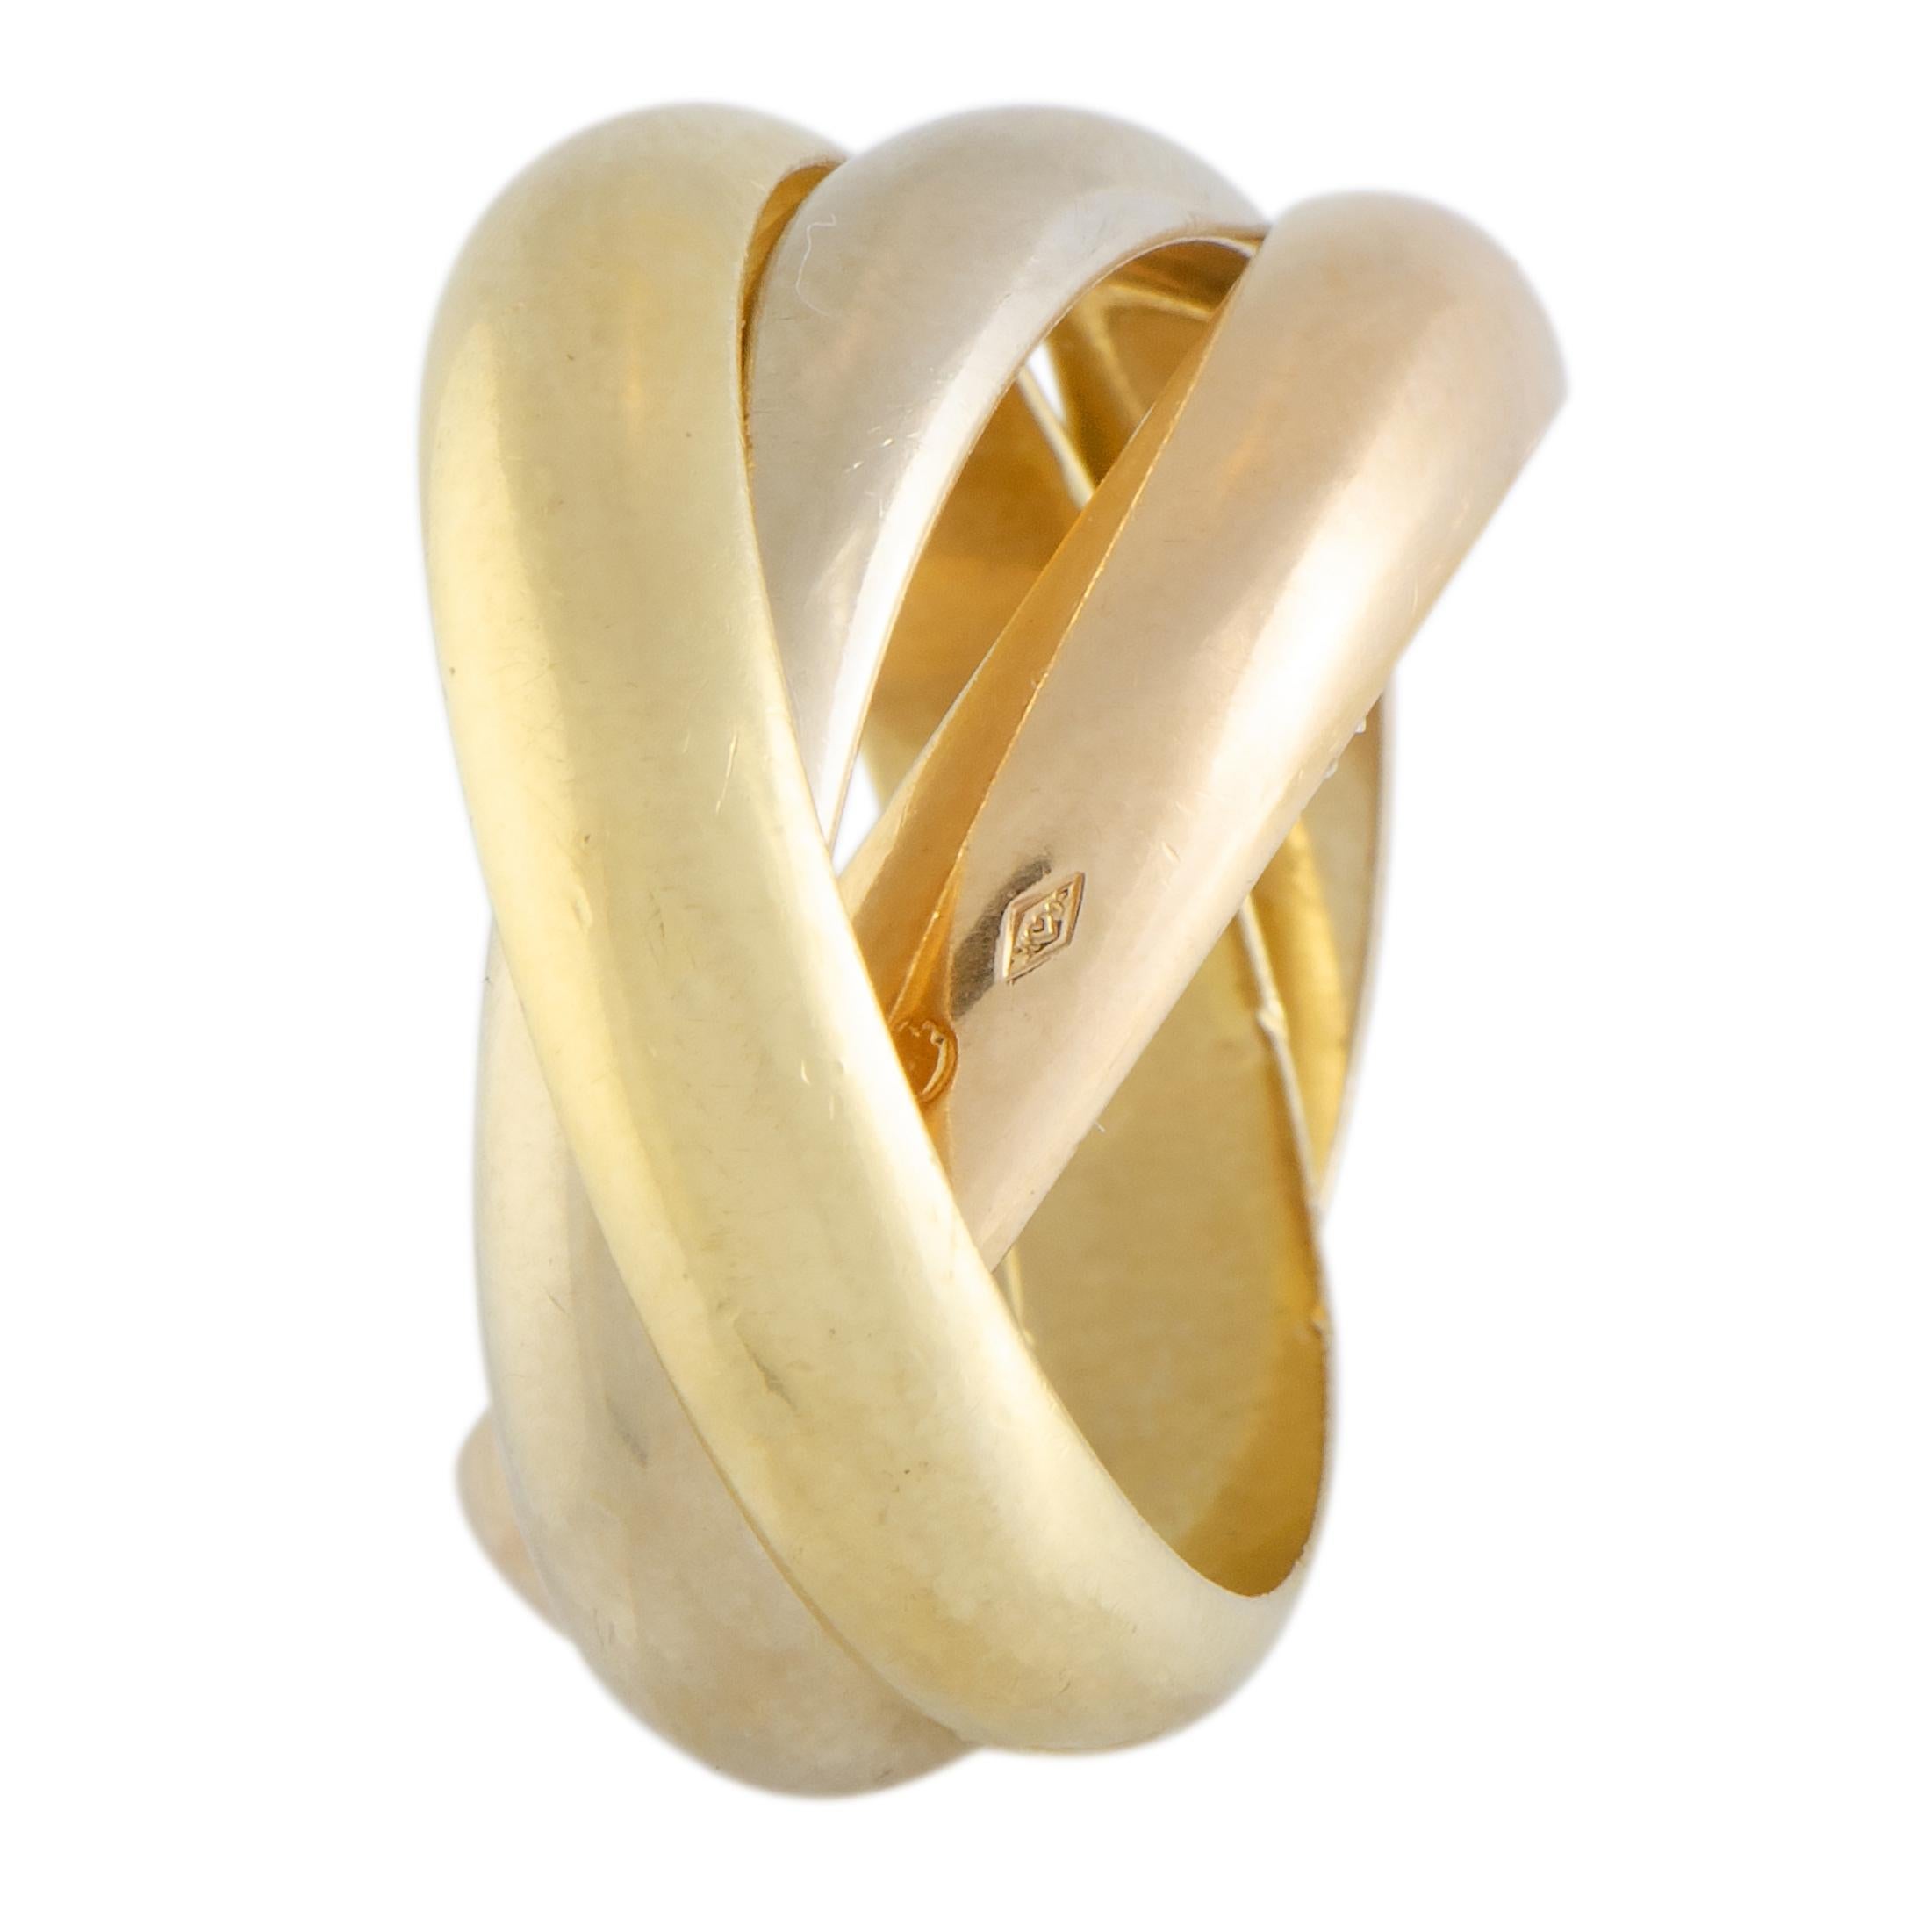 This fascinating trinity ring by Cartier is an item of prestigious quality and refined aesthetic style. The elegant ring is beautifully designed by interloping three bands that are made from a spectacular combination of shimmering 18K yellow, white